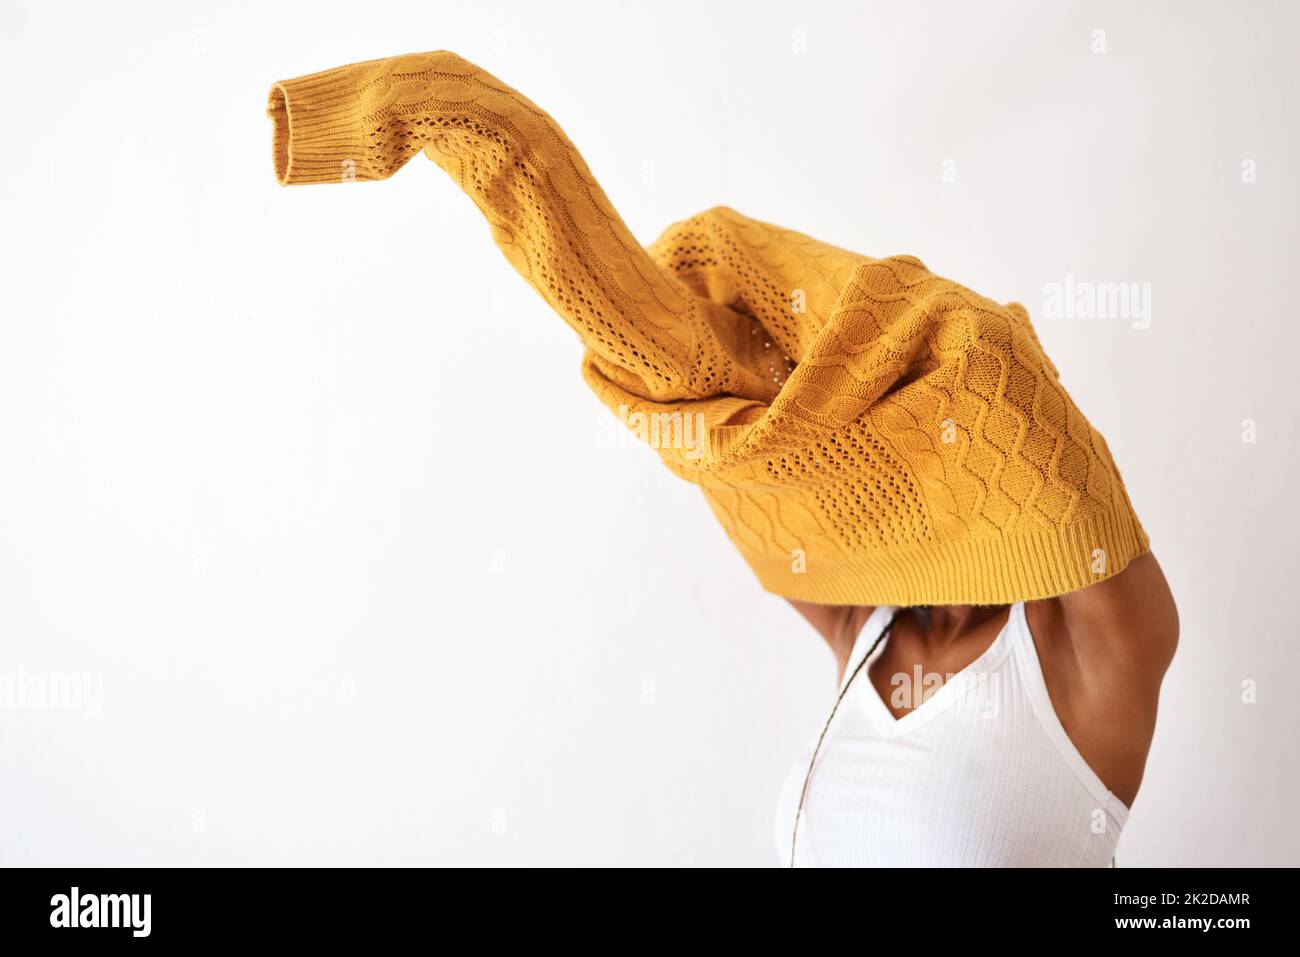 Its knitwear season. Studio shot of an unrecognizable woman getting dressed against a white background. Stock Photo